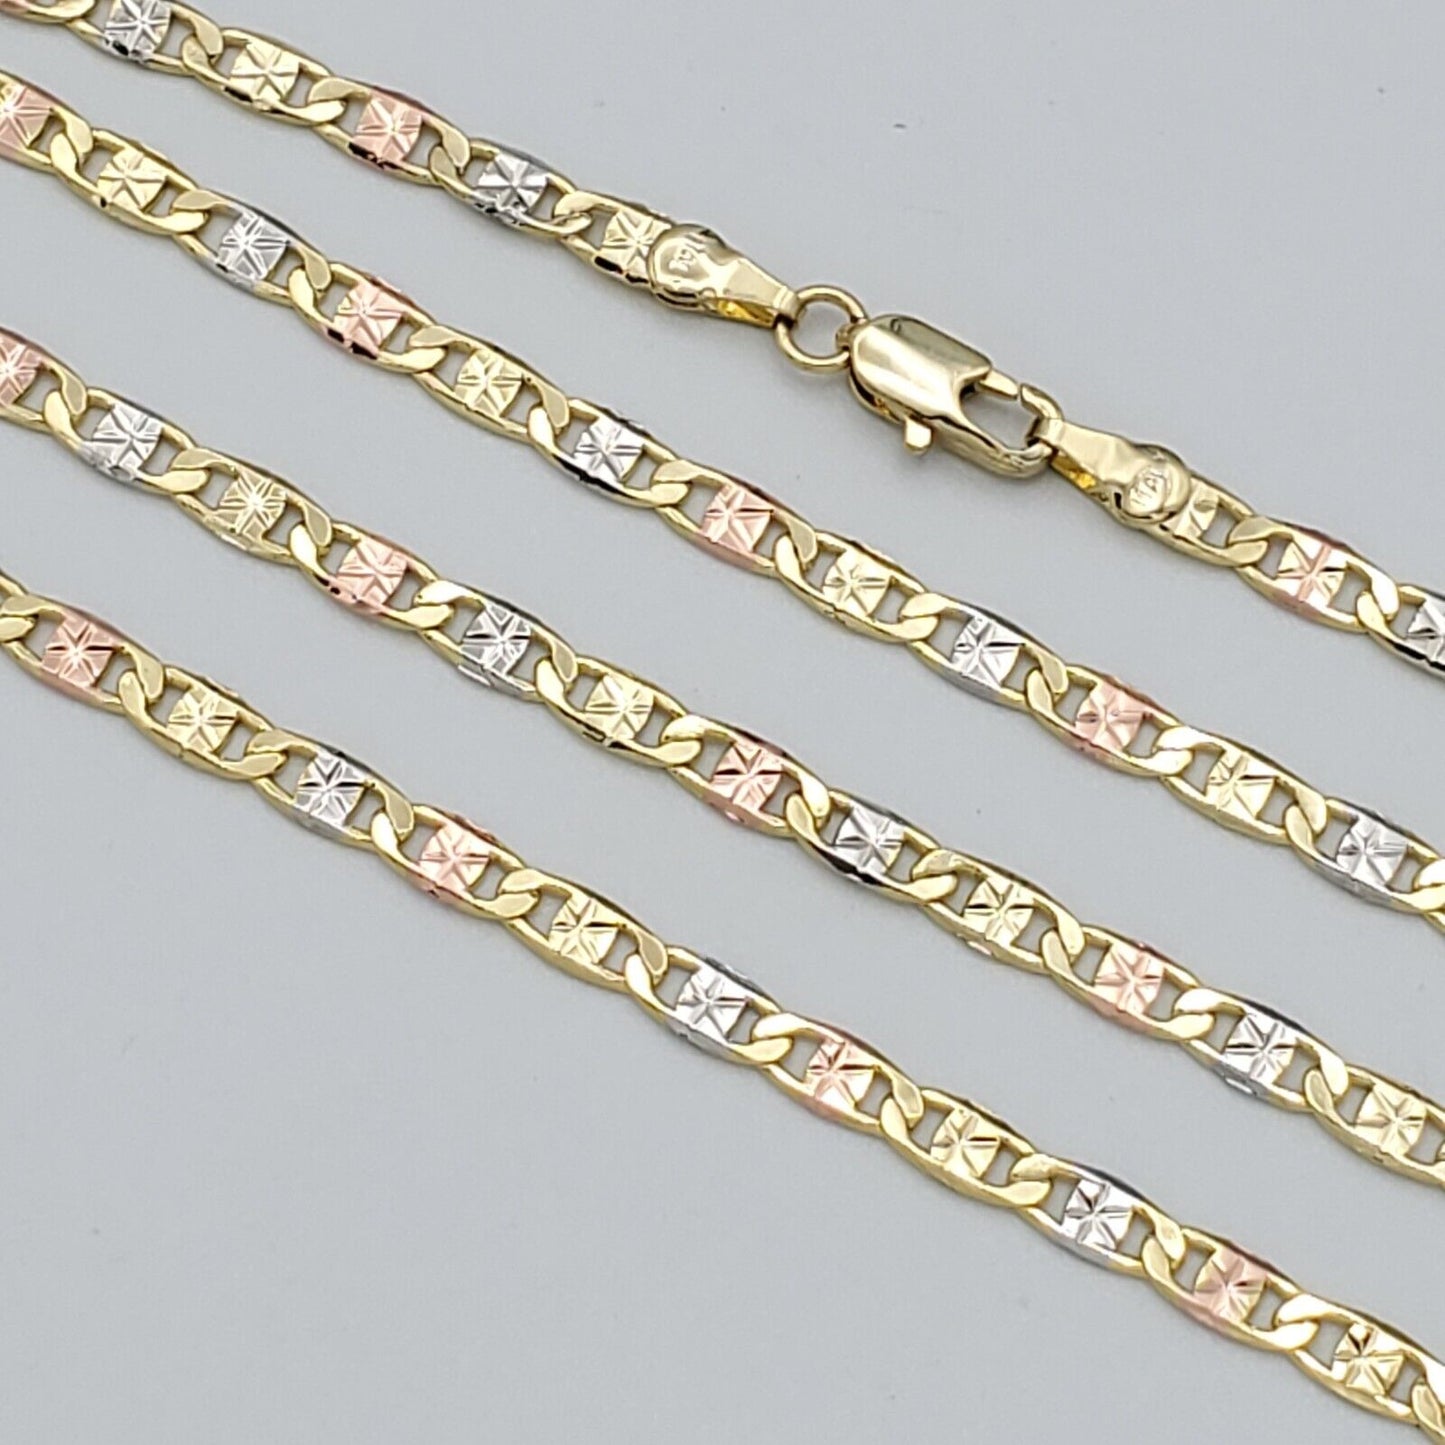 Necklaces - Tri Color Gold Plated. Chain Necklace - Mariner Style - 24in Long - 4mm